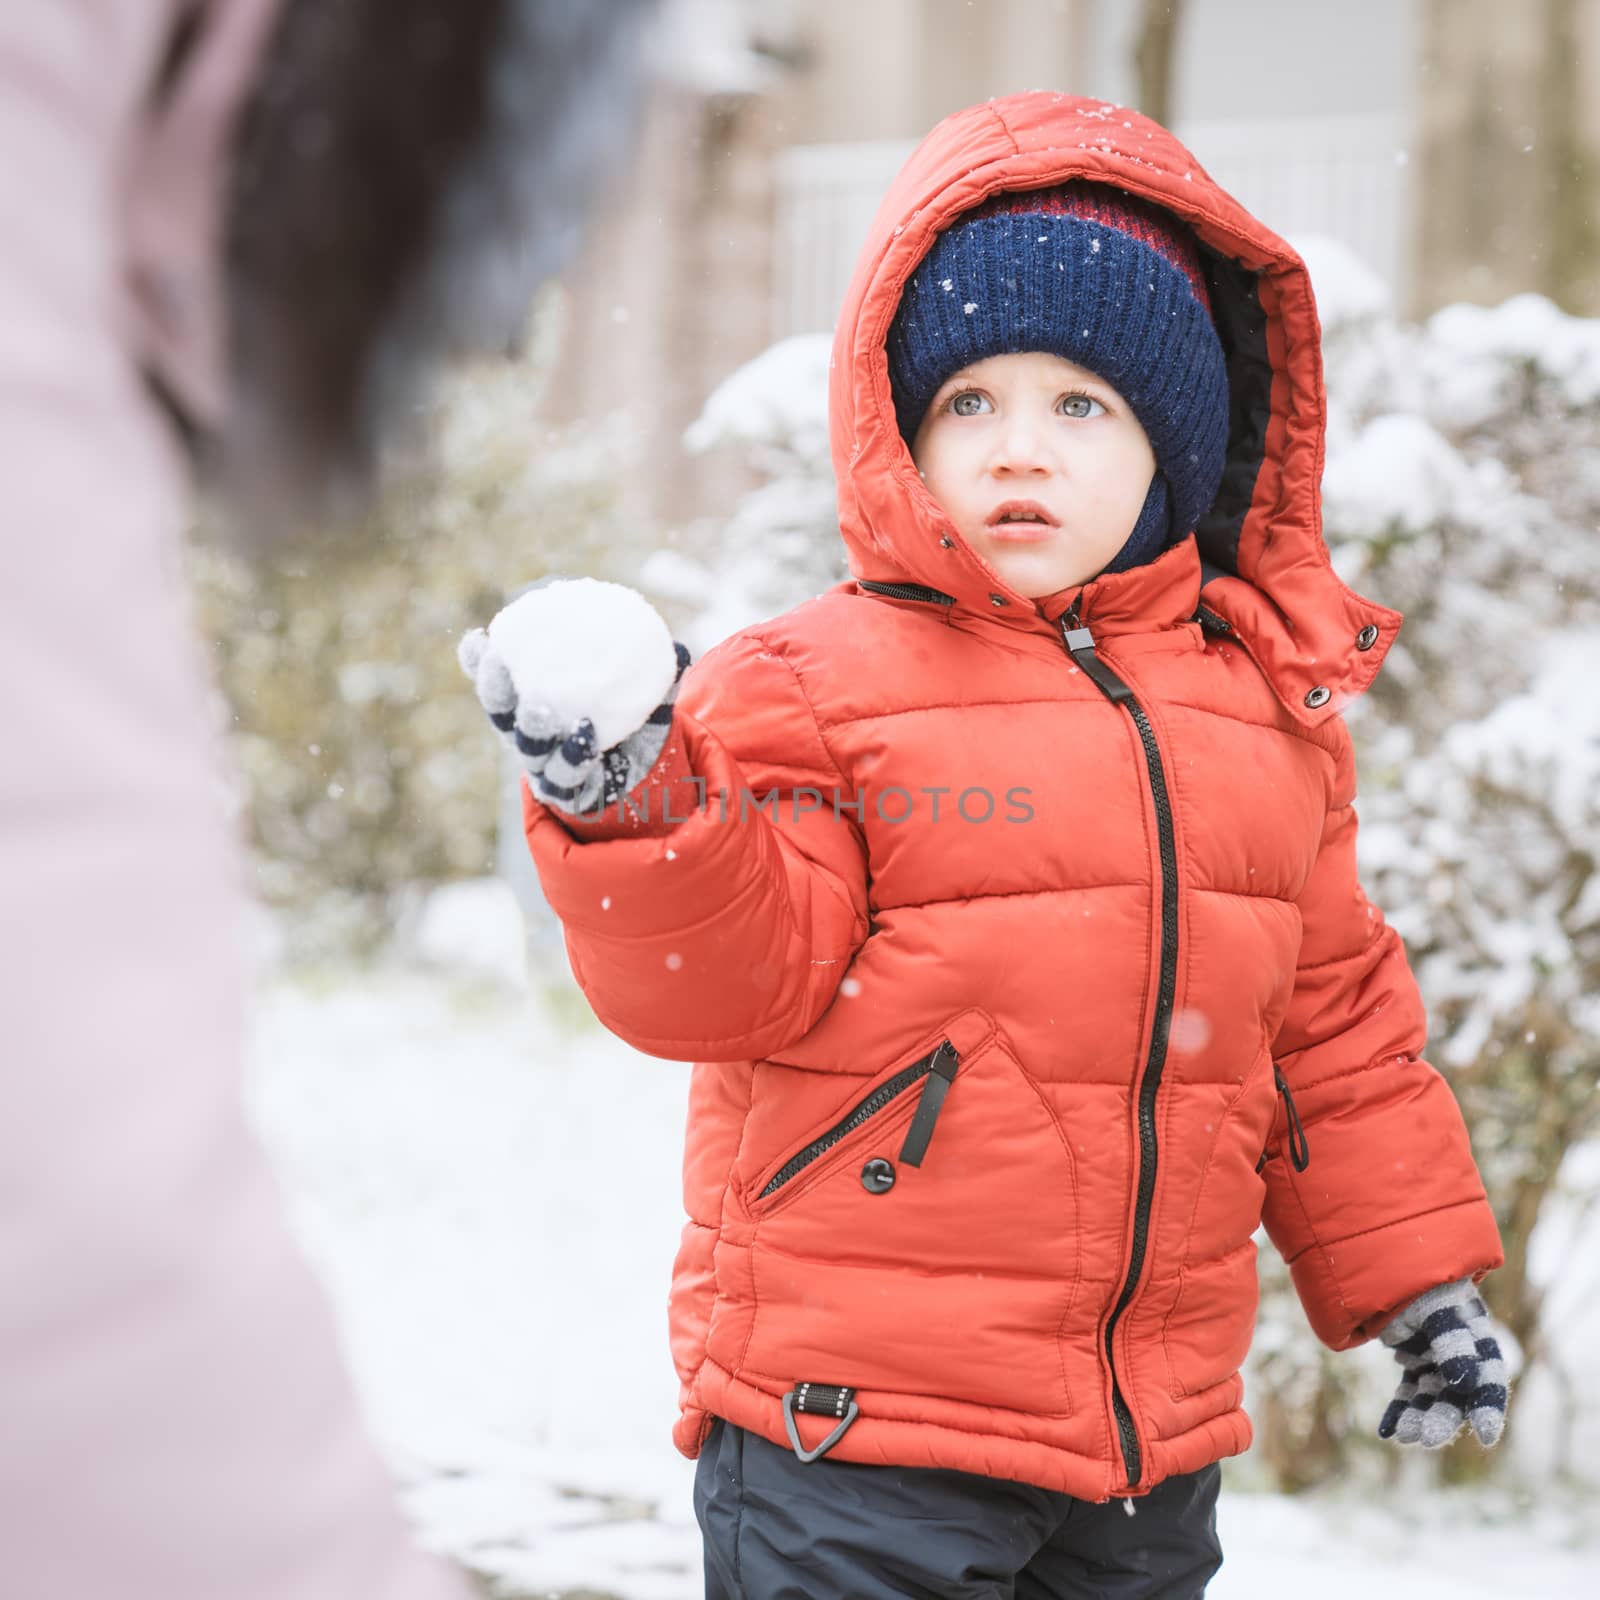 Child while it snows looks towards the mother with a snowball in his hands